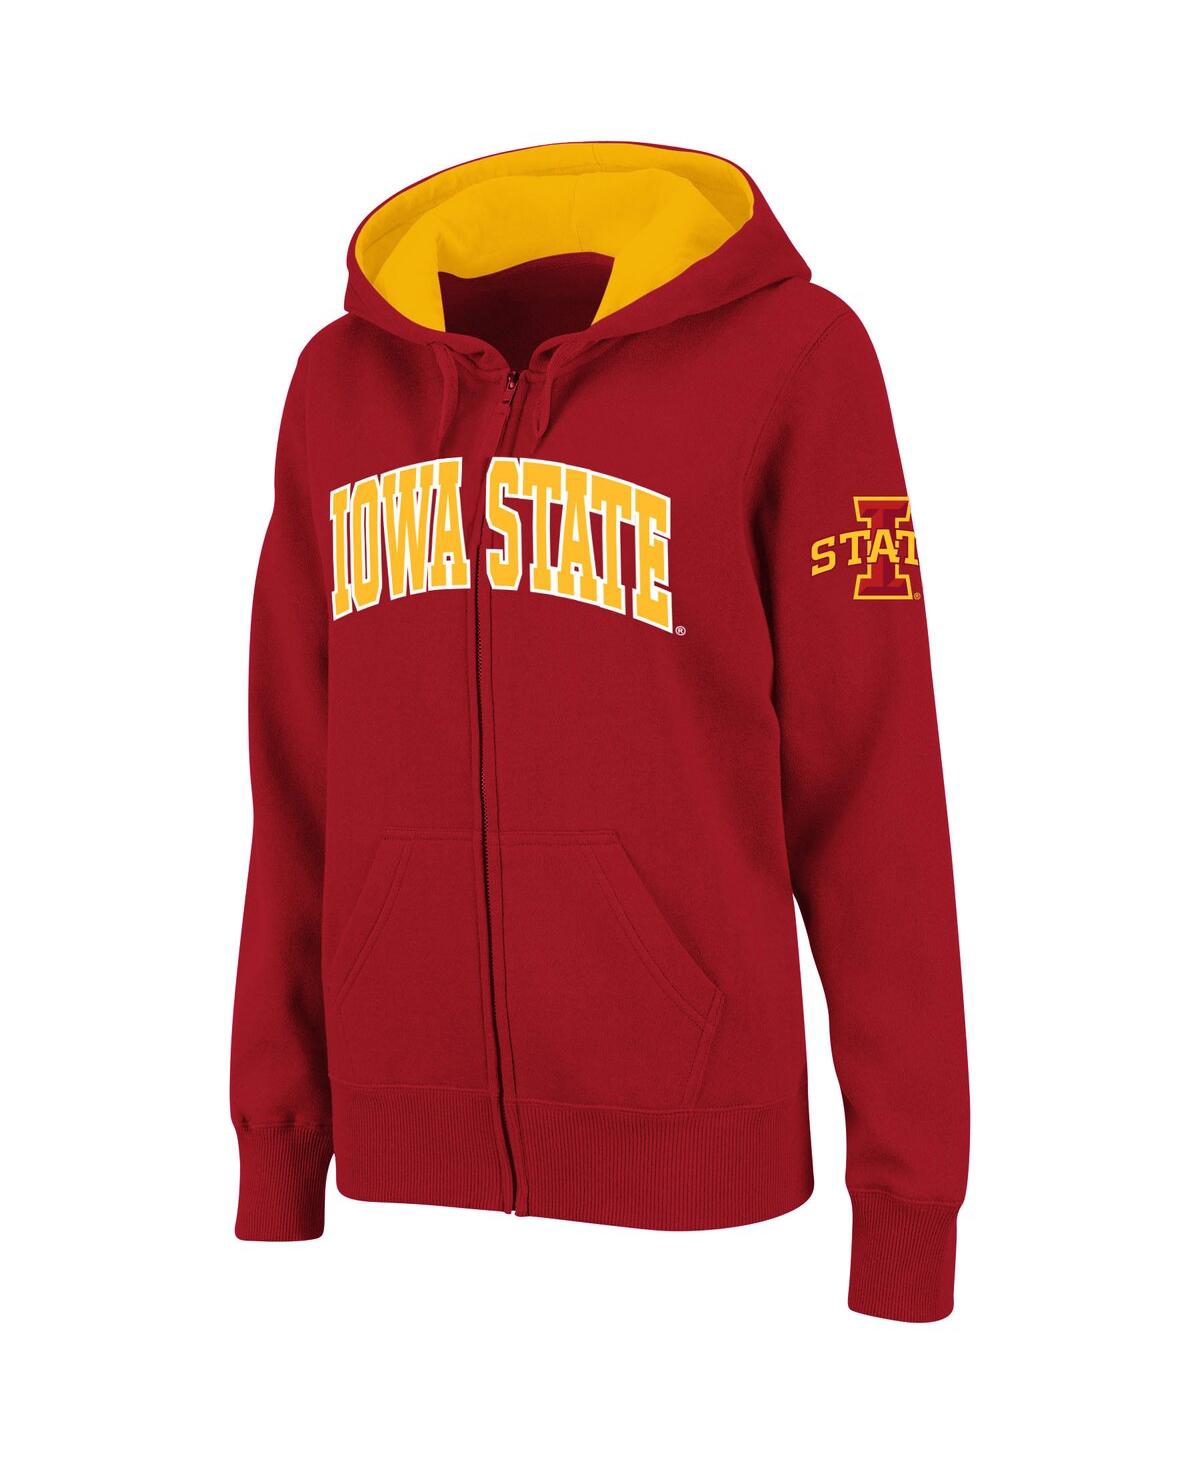 Stadium Athletic Women's  Cardinal Iowa State Cyclones Arched Name Full-zip Hoodie